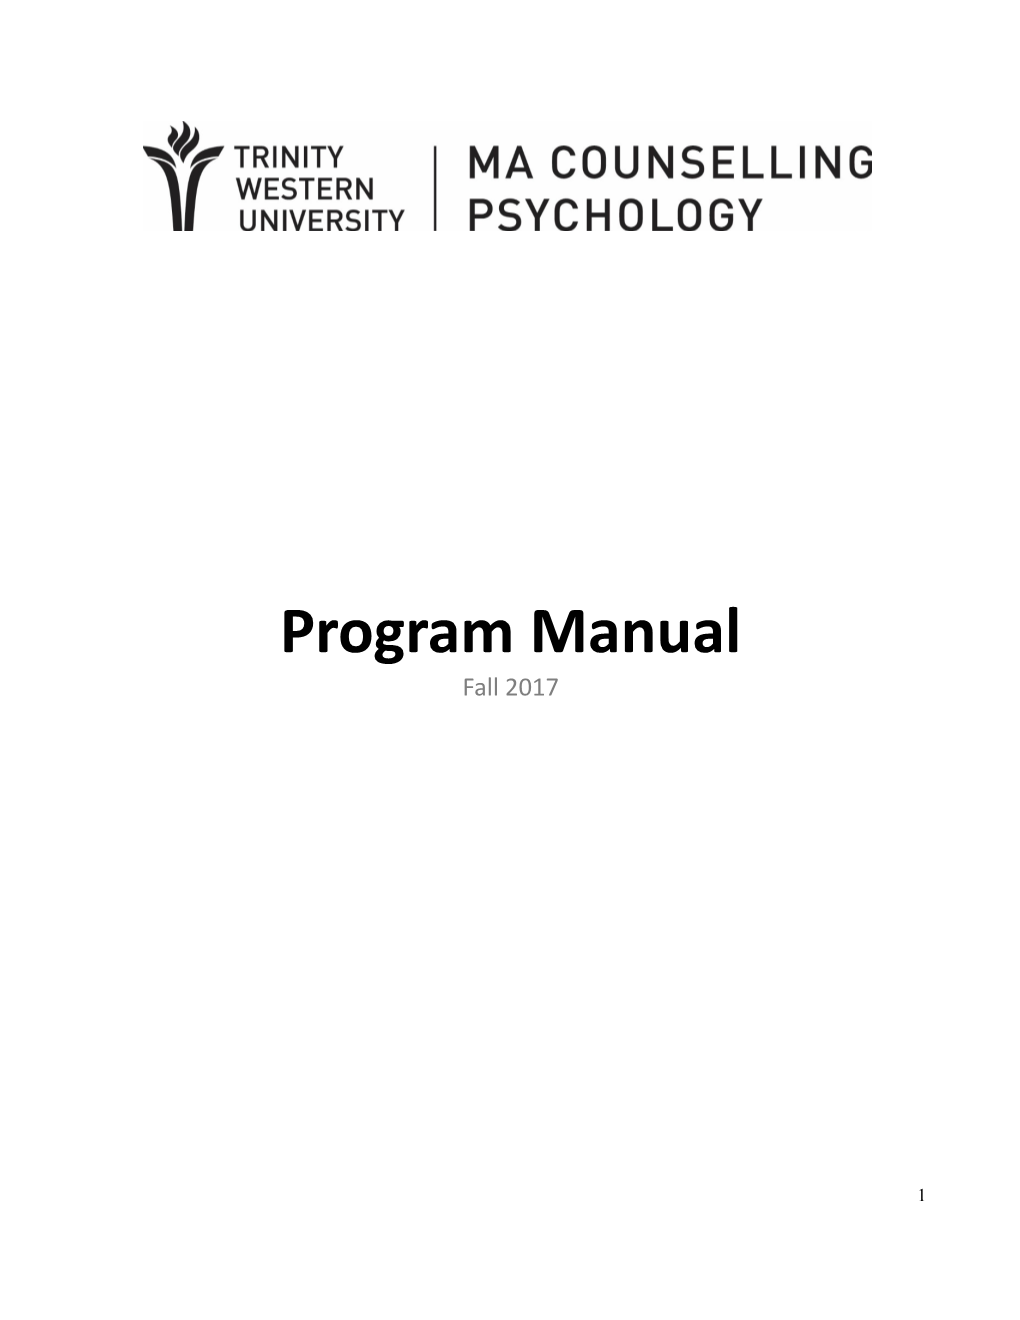 Graduate Program in Counselling Psychology